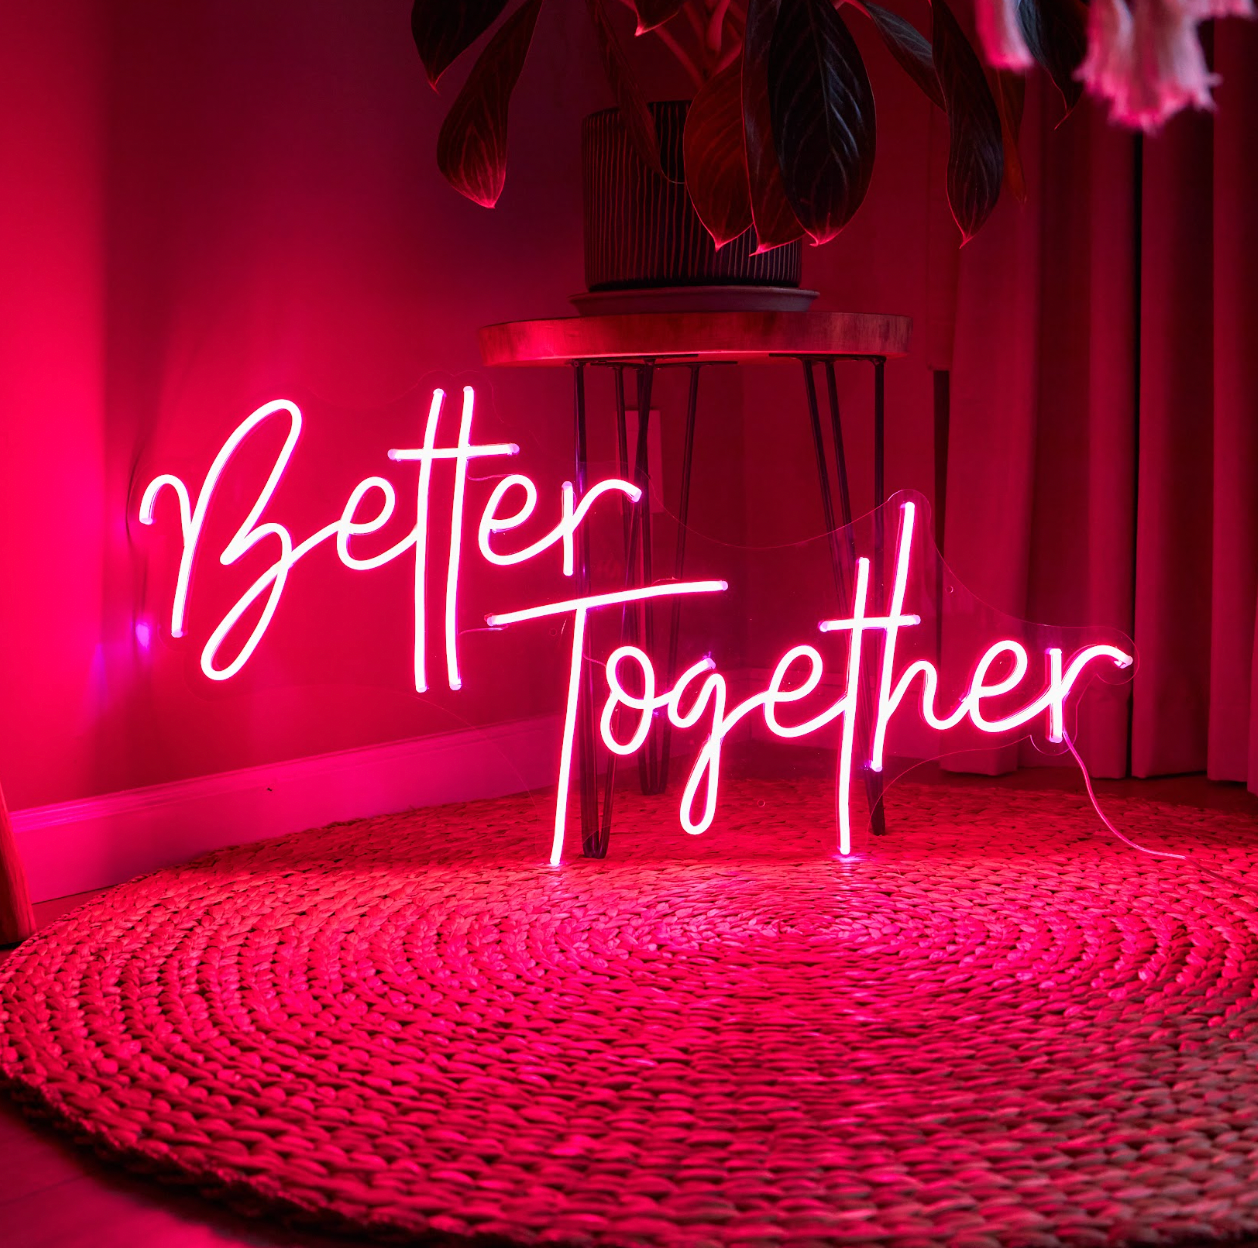 Neon sign "Better Together" with vibrant colors